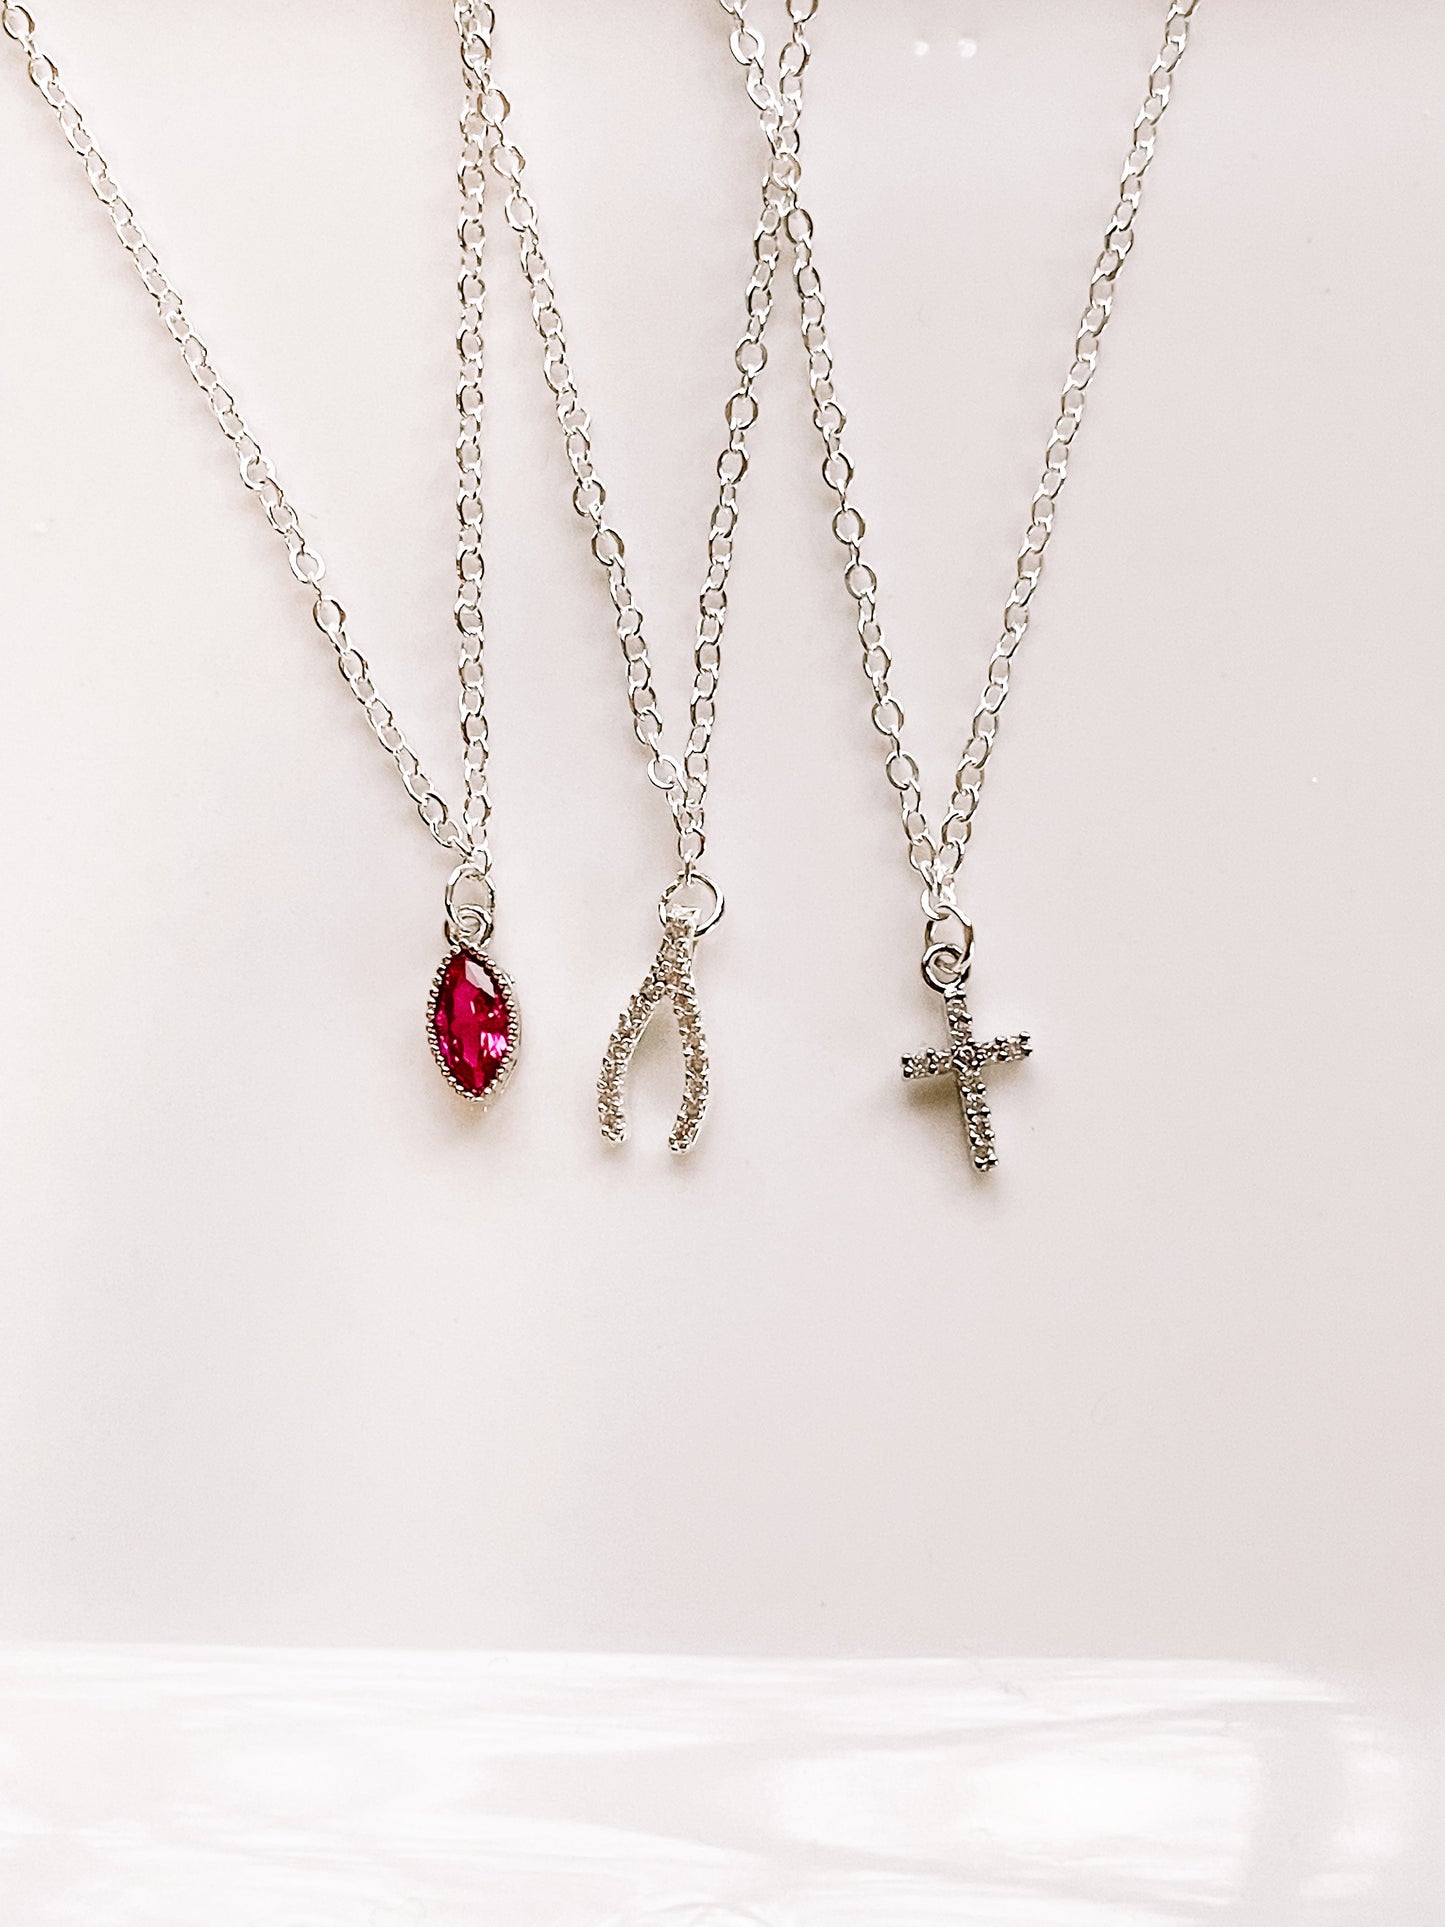 Studded cross charm necklace